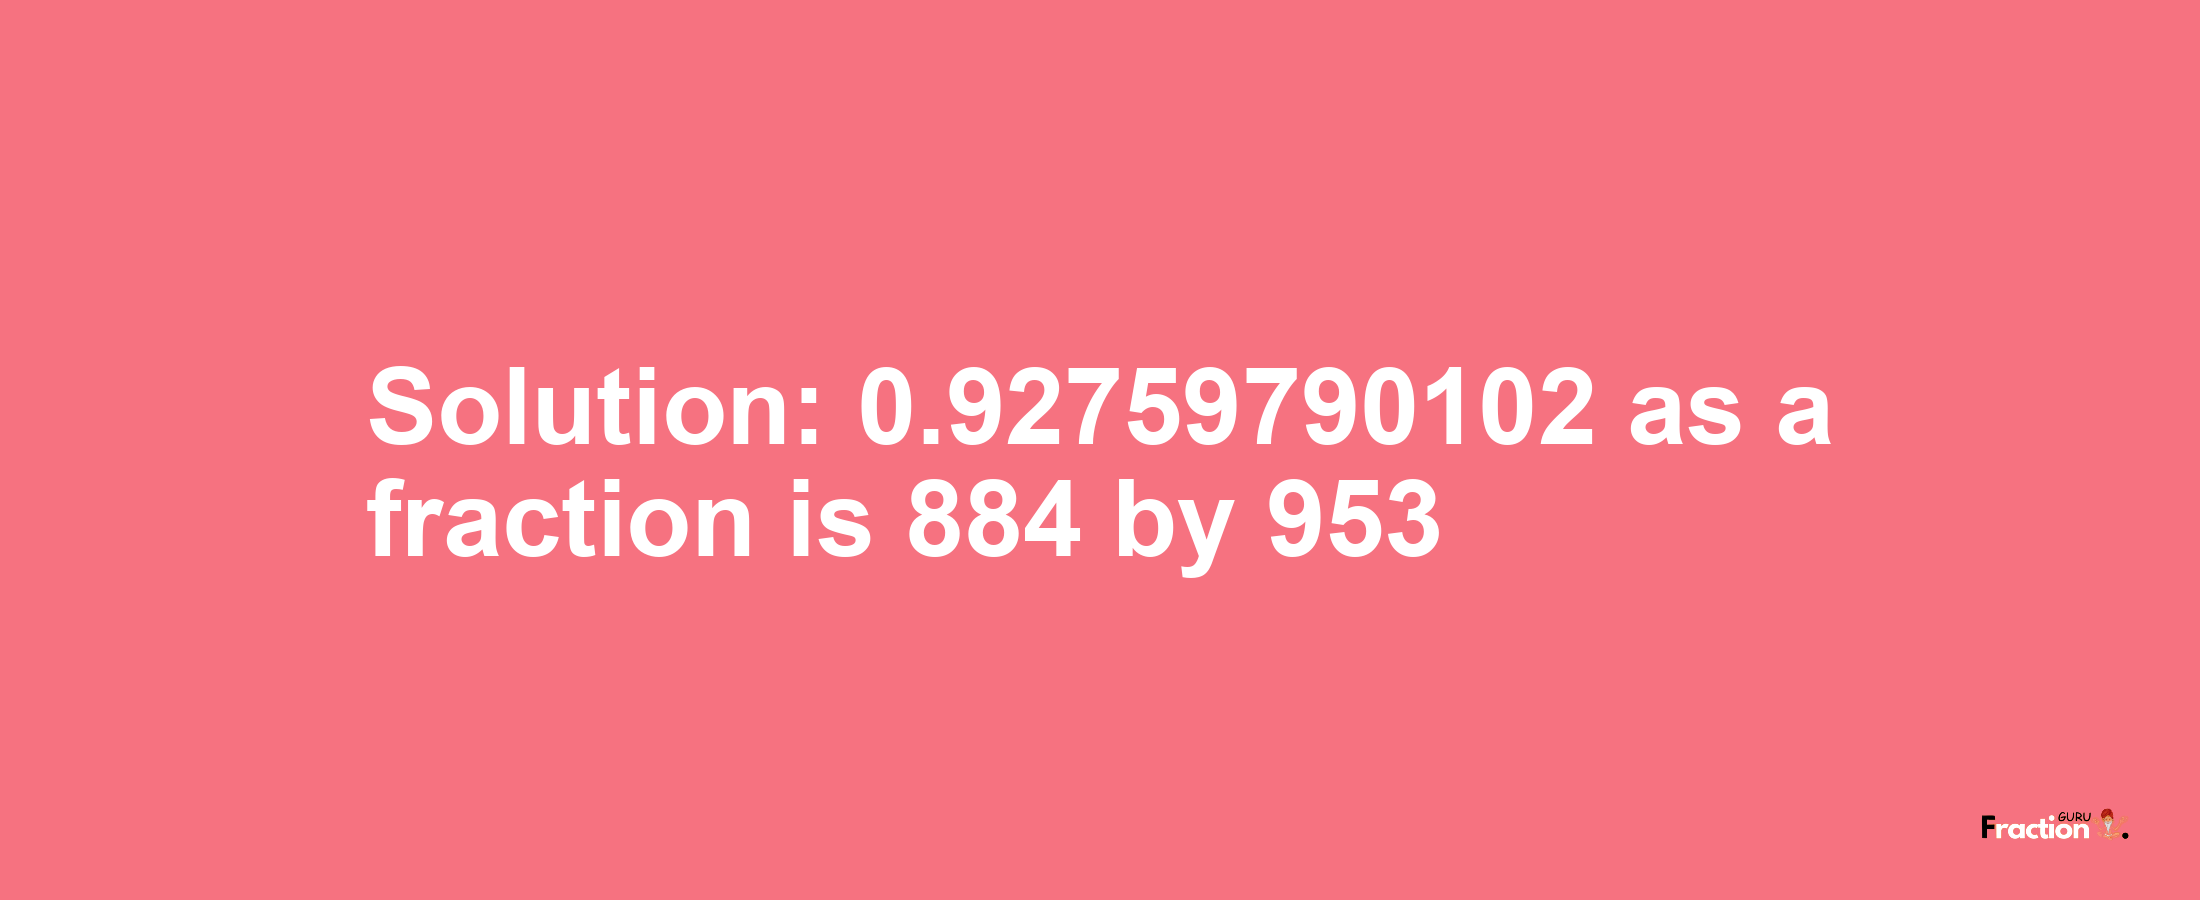 Solution:0.92759790102 as a fraction is 884/953